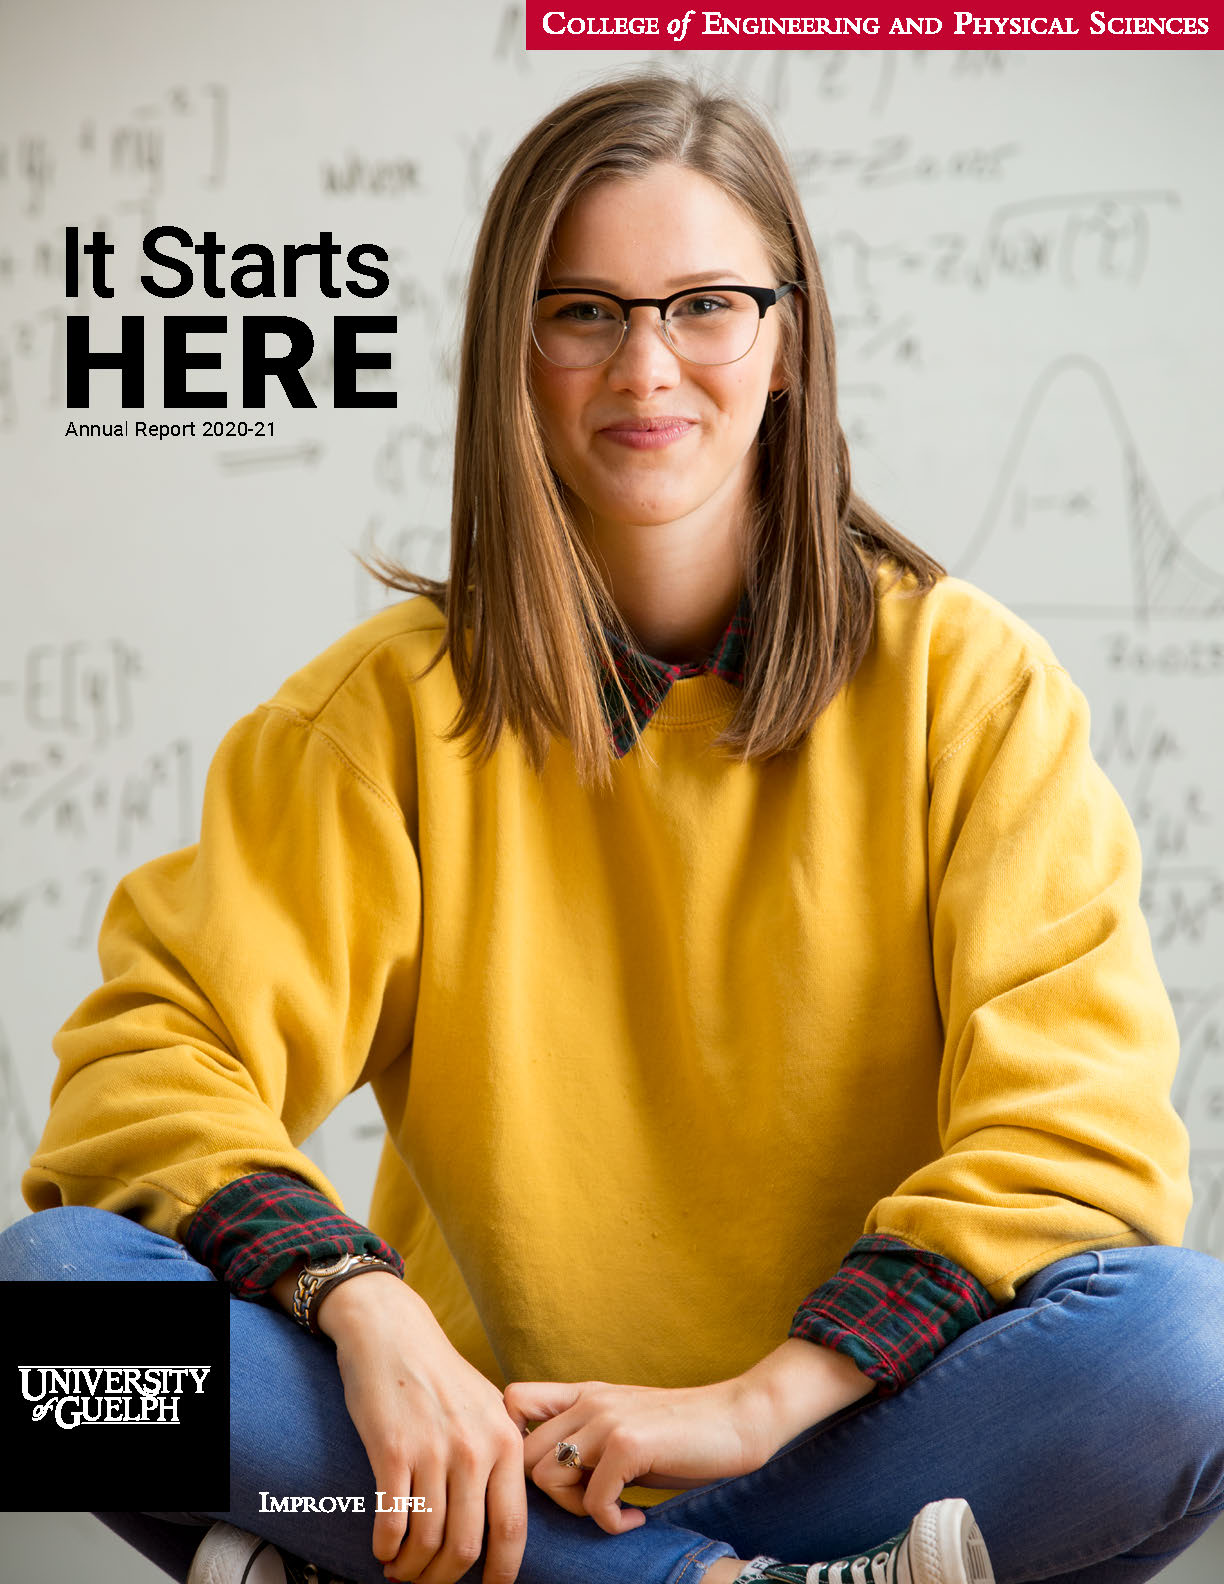 A student wearing a bright yellow sweater sits cross-legged and smiling at the camera. Equations can be seen on a whiteboard in the background. The CEPS lockup is split between the upper right-hand corner and lower left-hand corner.